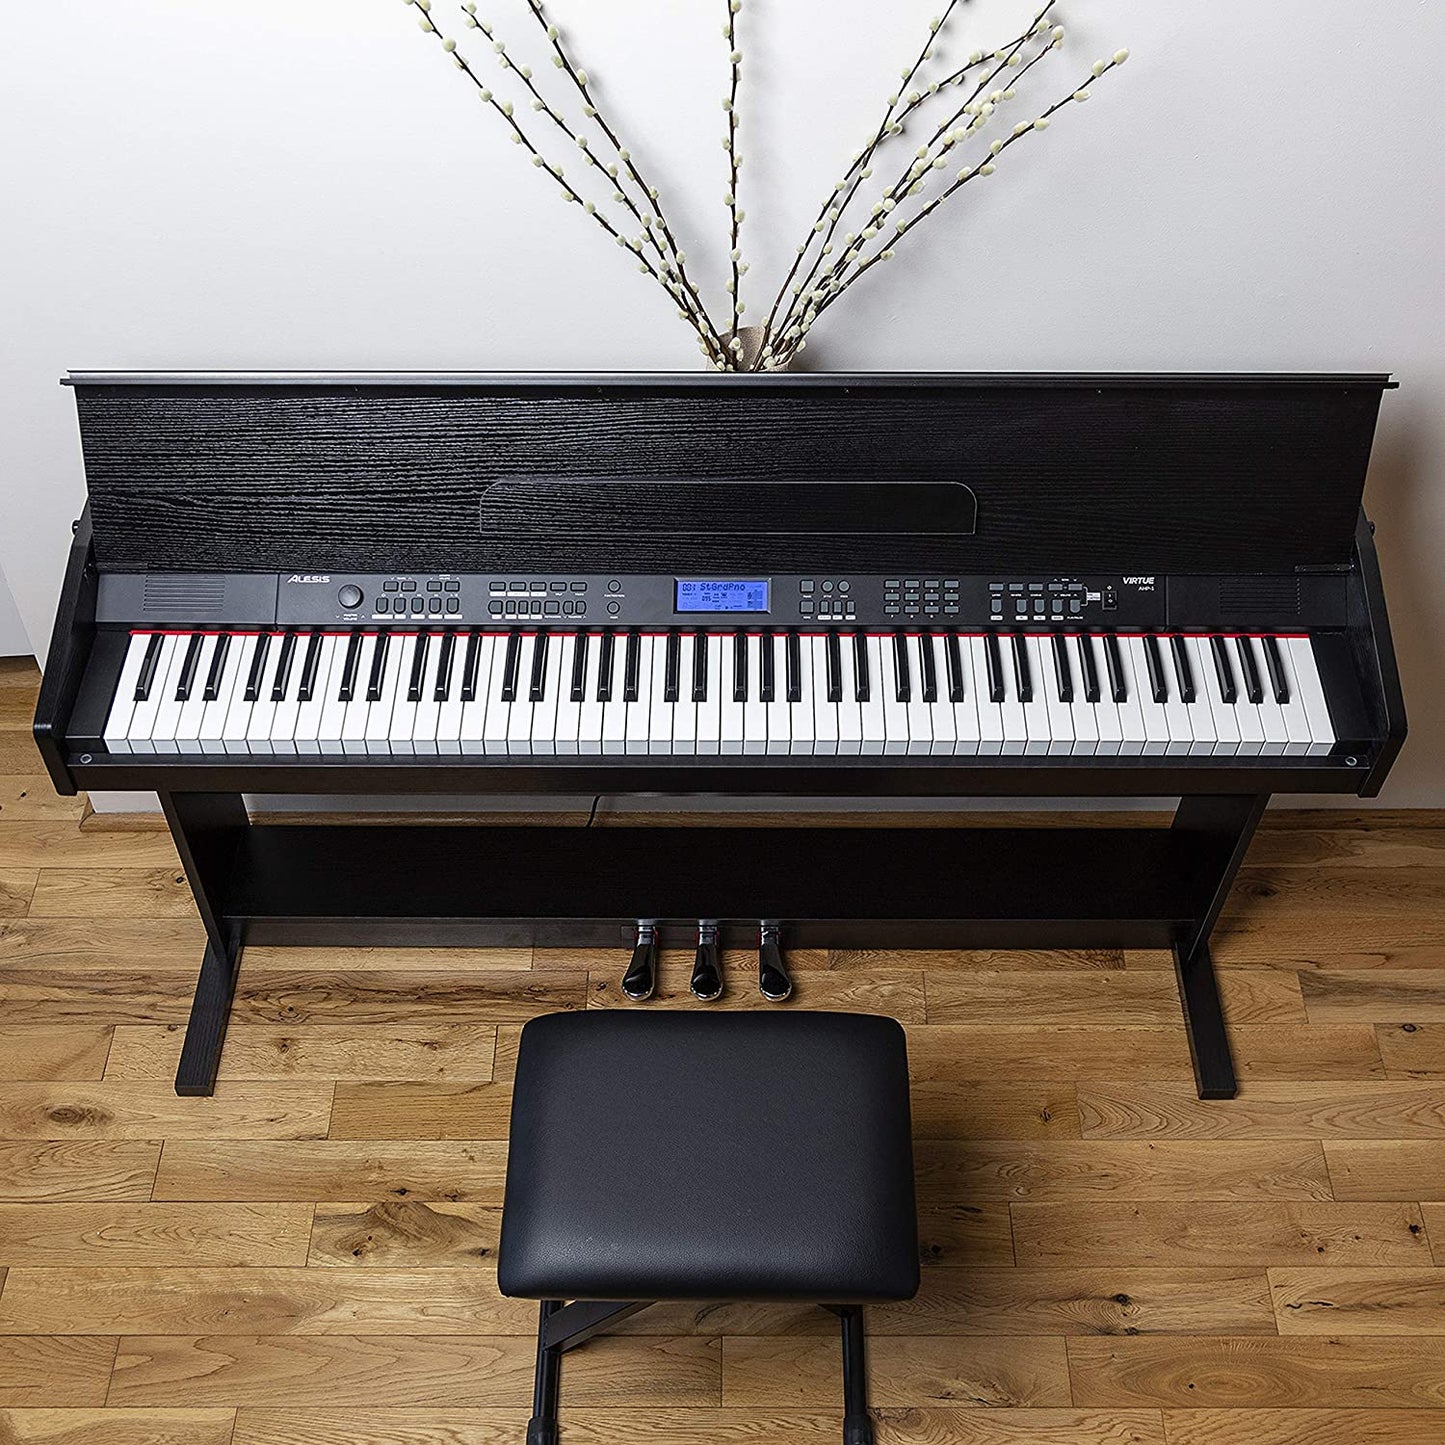 Alesis - Featuring a stylish and easy-to-assemble black wooden piano stand  with a built-in music rest and three pedals, and an adjustable piano bench,  the Virtue 88-key digital piano includes everything that